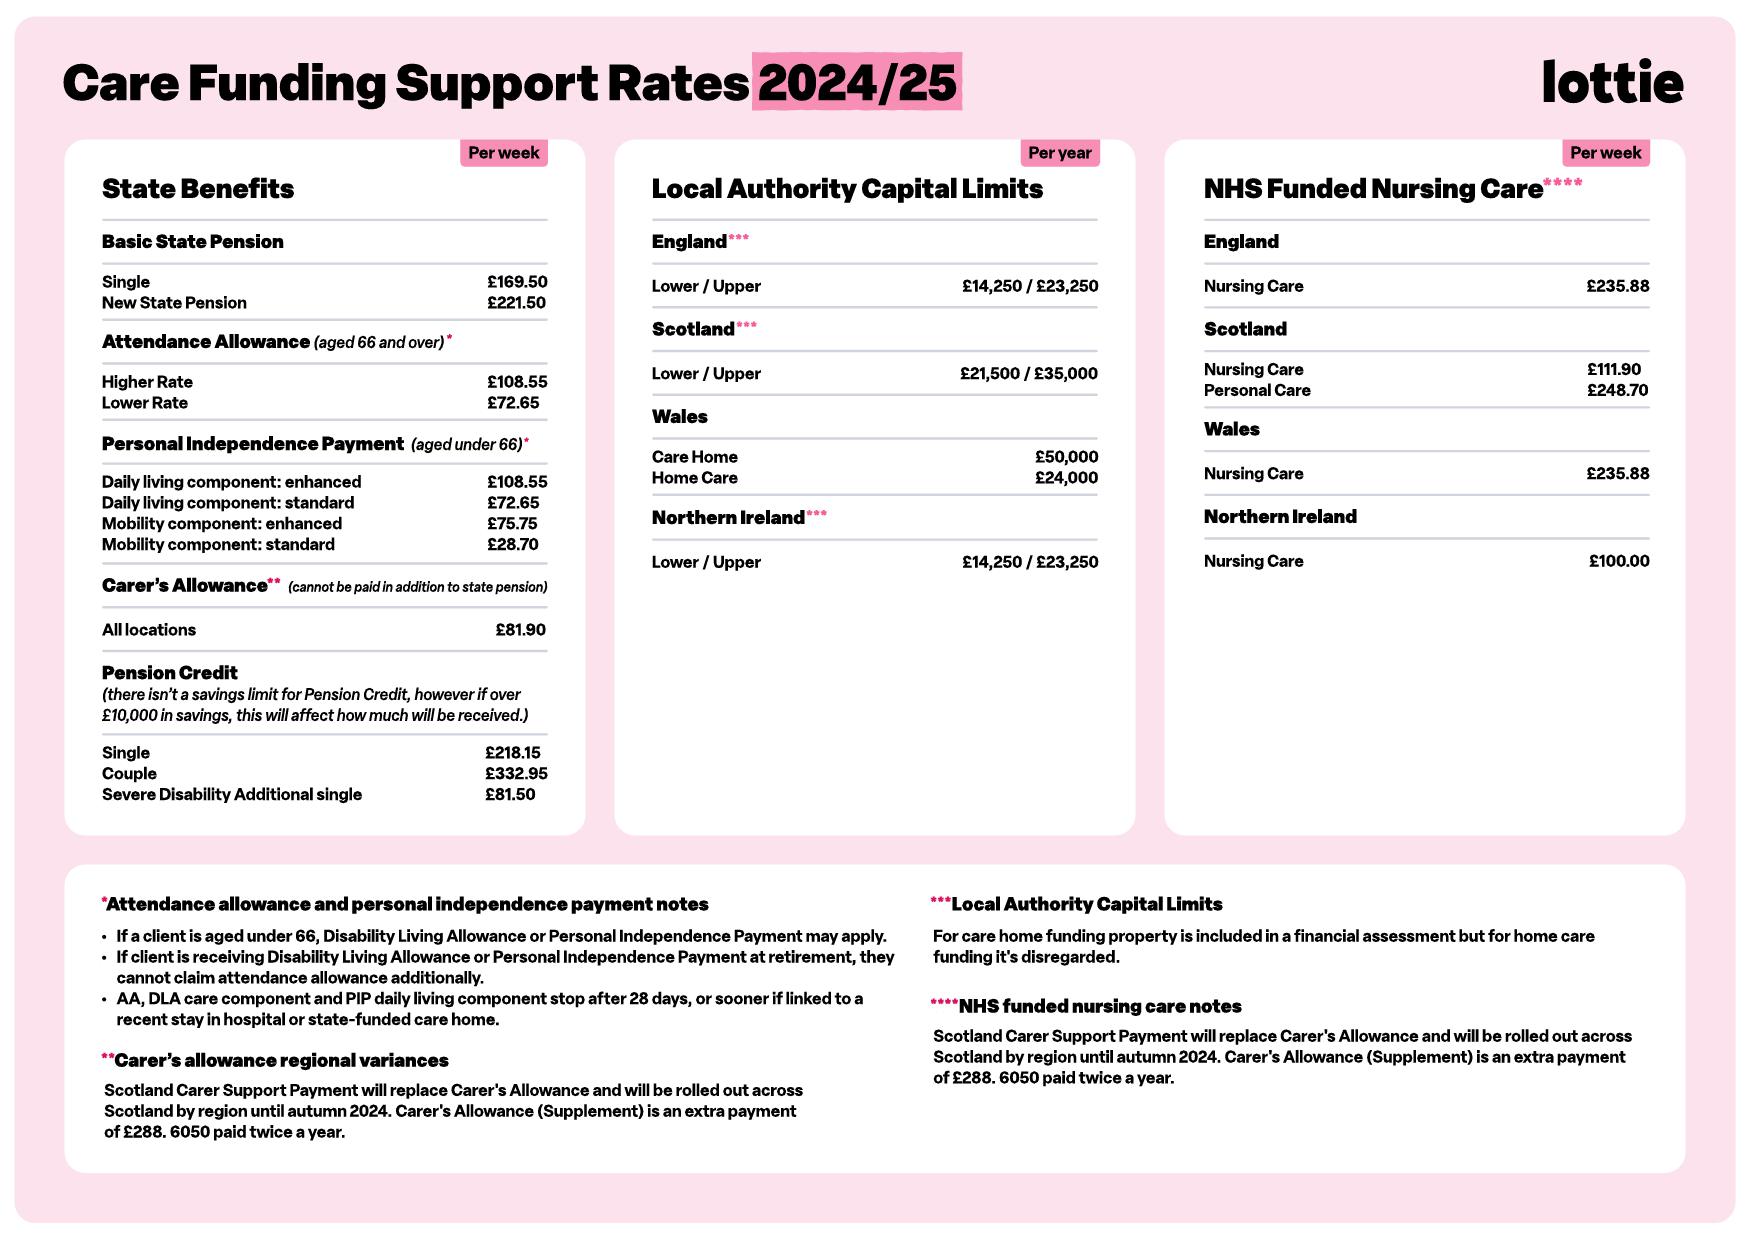 Care funding support rates 2024/2025